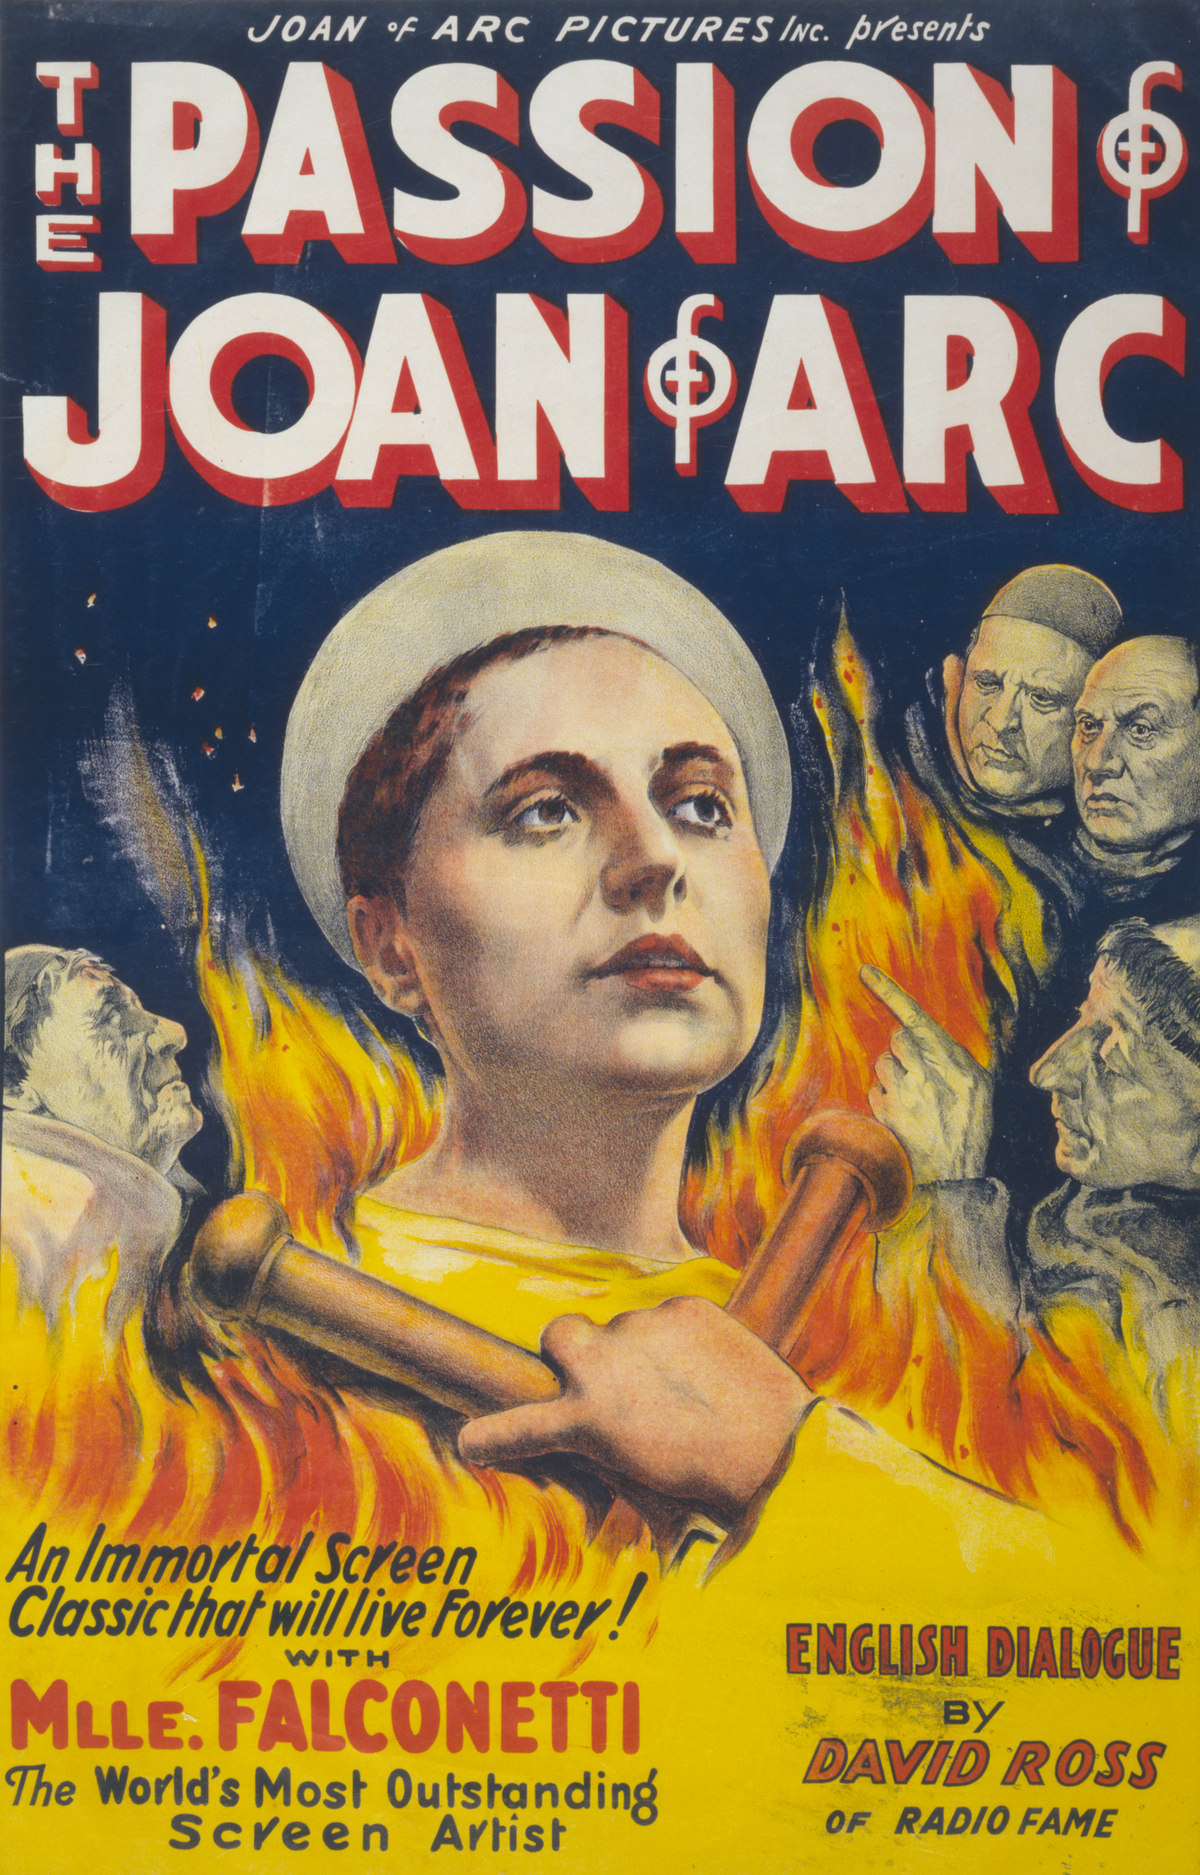 The Passion Of Joan Of Arc wallpaper, Movie, HQ The Passion Of Joan Of Arc pictureK Wallpaper 2019